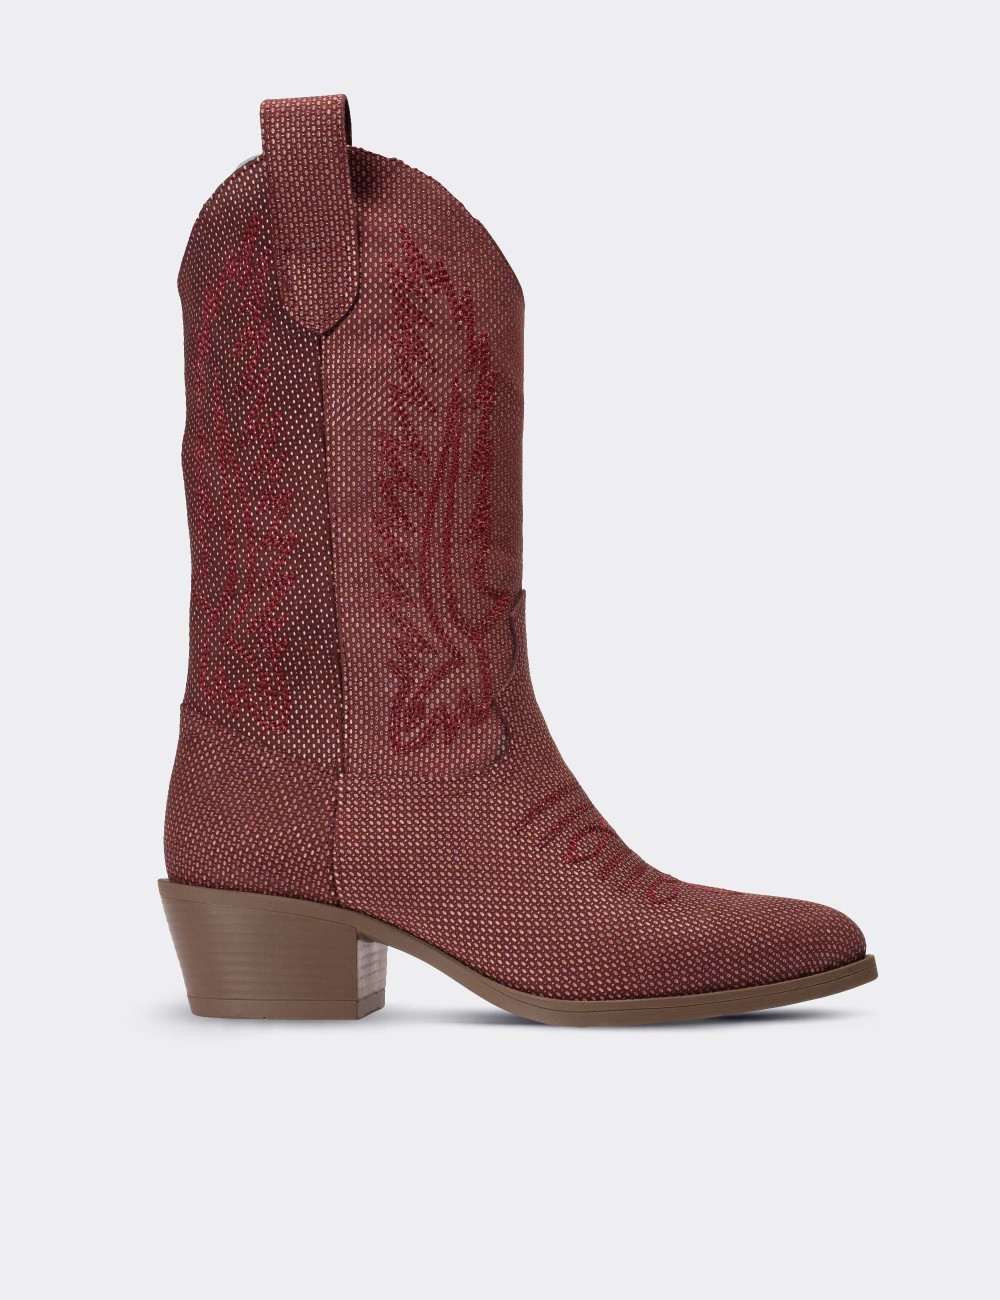 Burgundy Suede Leather  Boots - E8002ZBRDC01